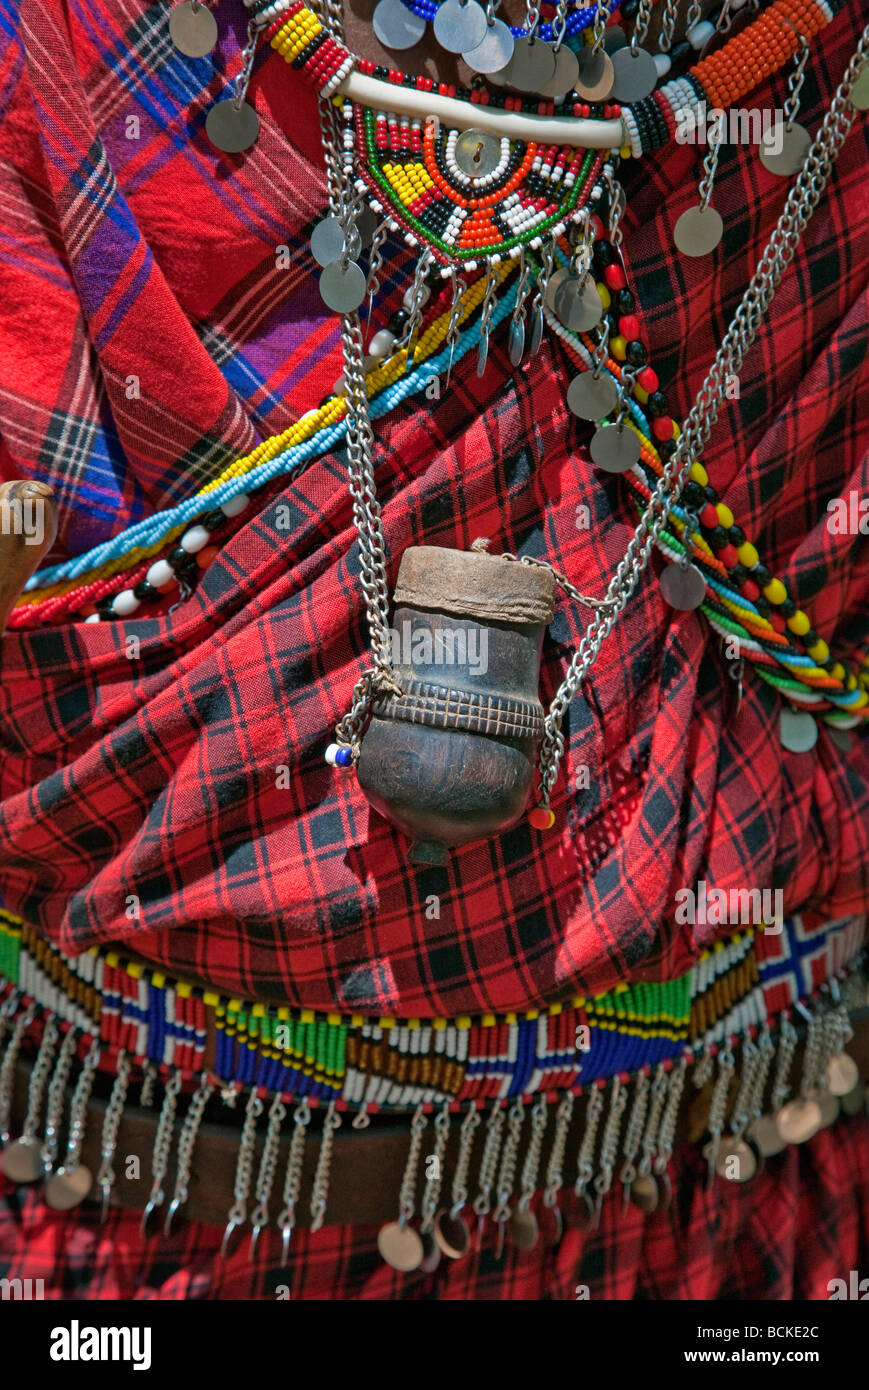 Kenya. Masai Mara. The traditional attire of a junior Maasai elder including a snuff container carved from a buffalo  s horn. Stock Photo